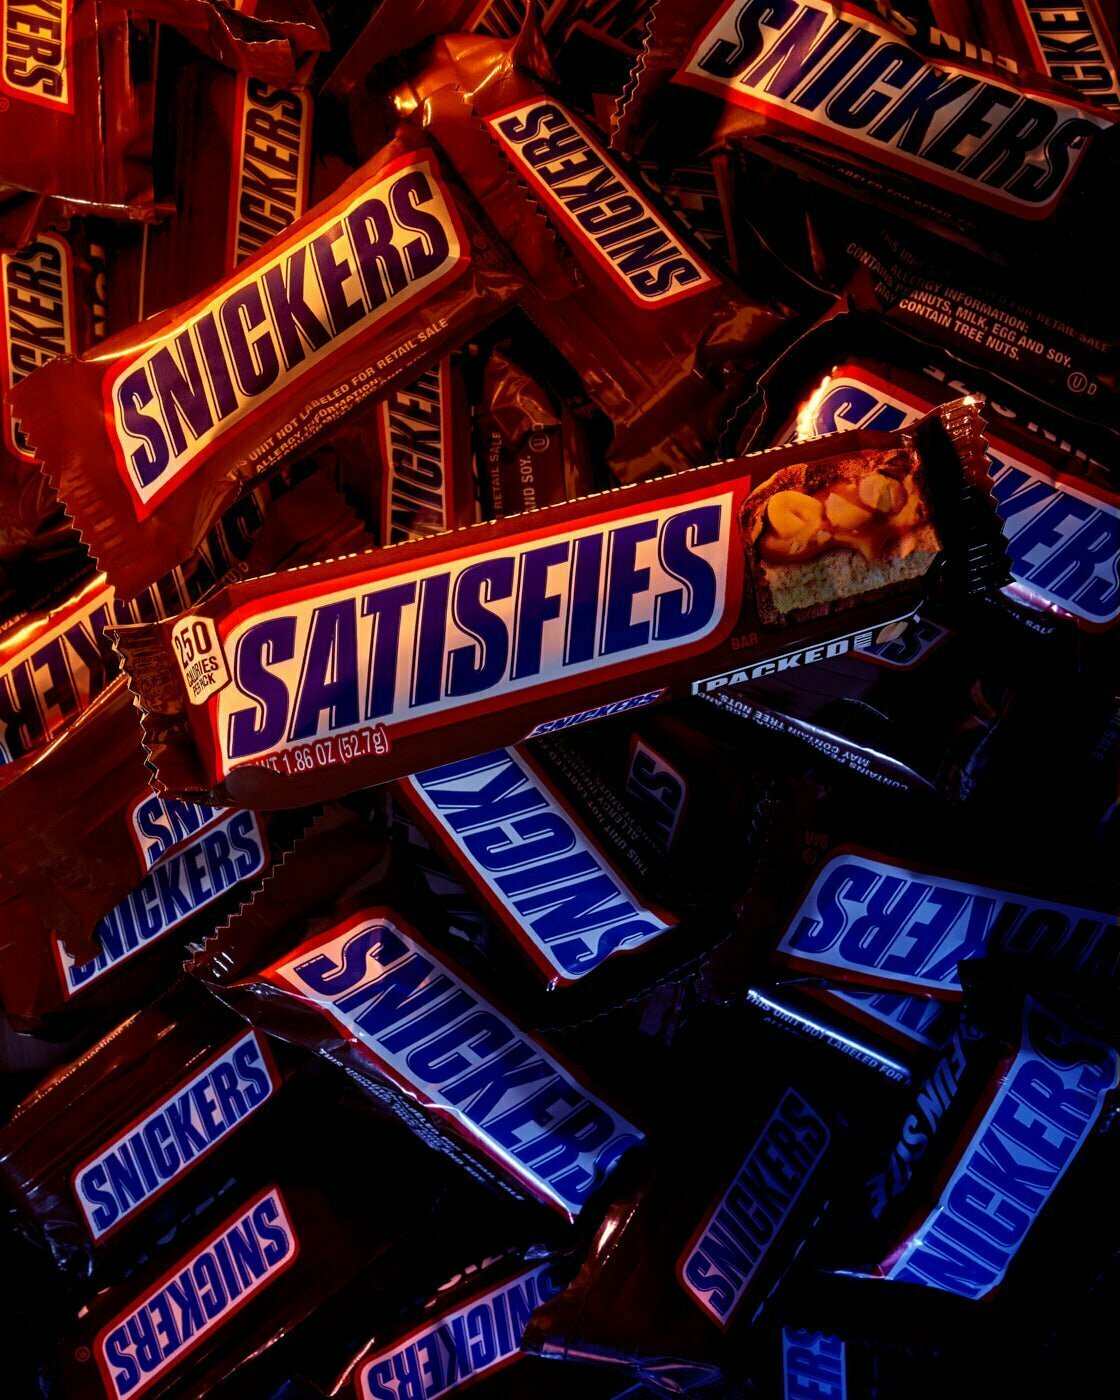 A full size Snickers candy bar still in wrapper sitting on top of mini Snickers candy bars also still in their wrappers.